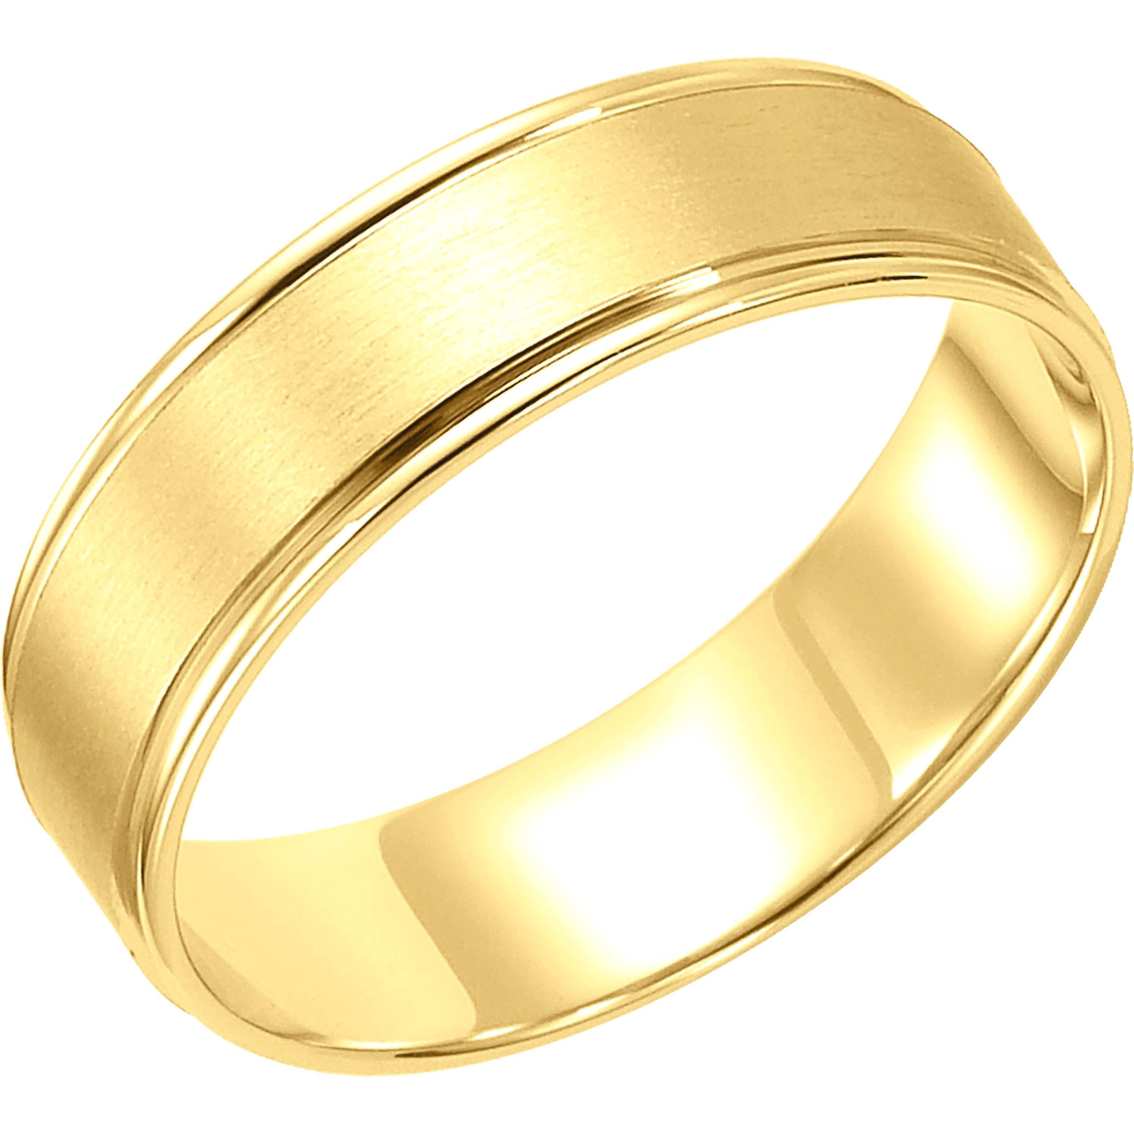 14k Yellow Gold Engraved 6mm Band | Wedding Bands | Jewelry & Watches ...